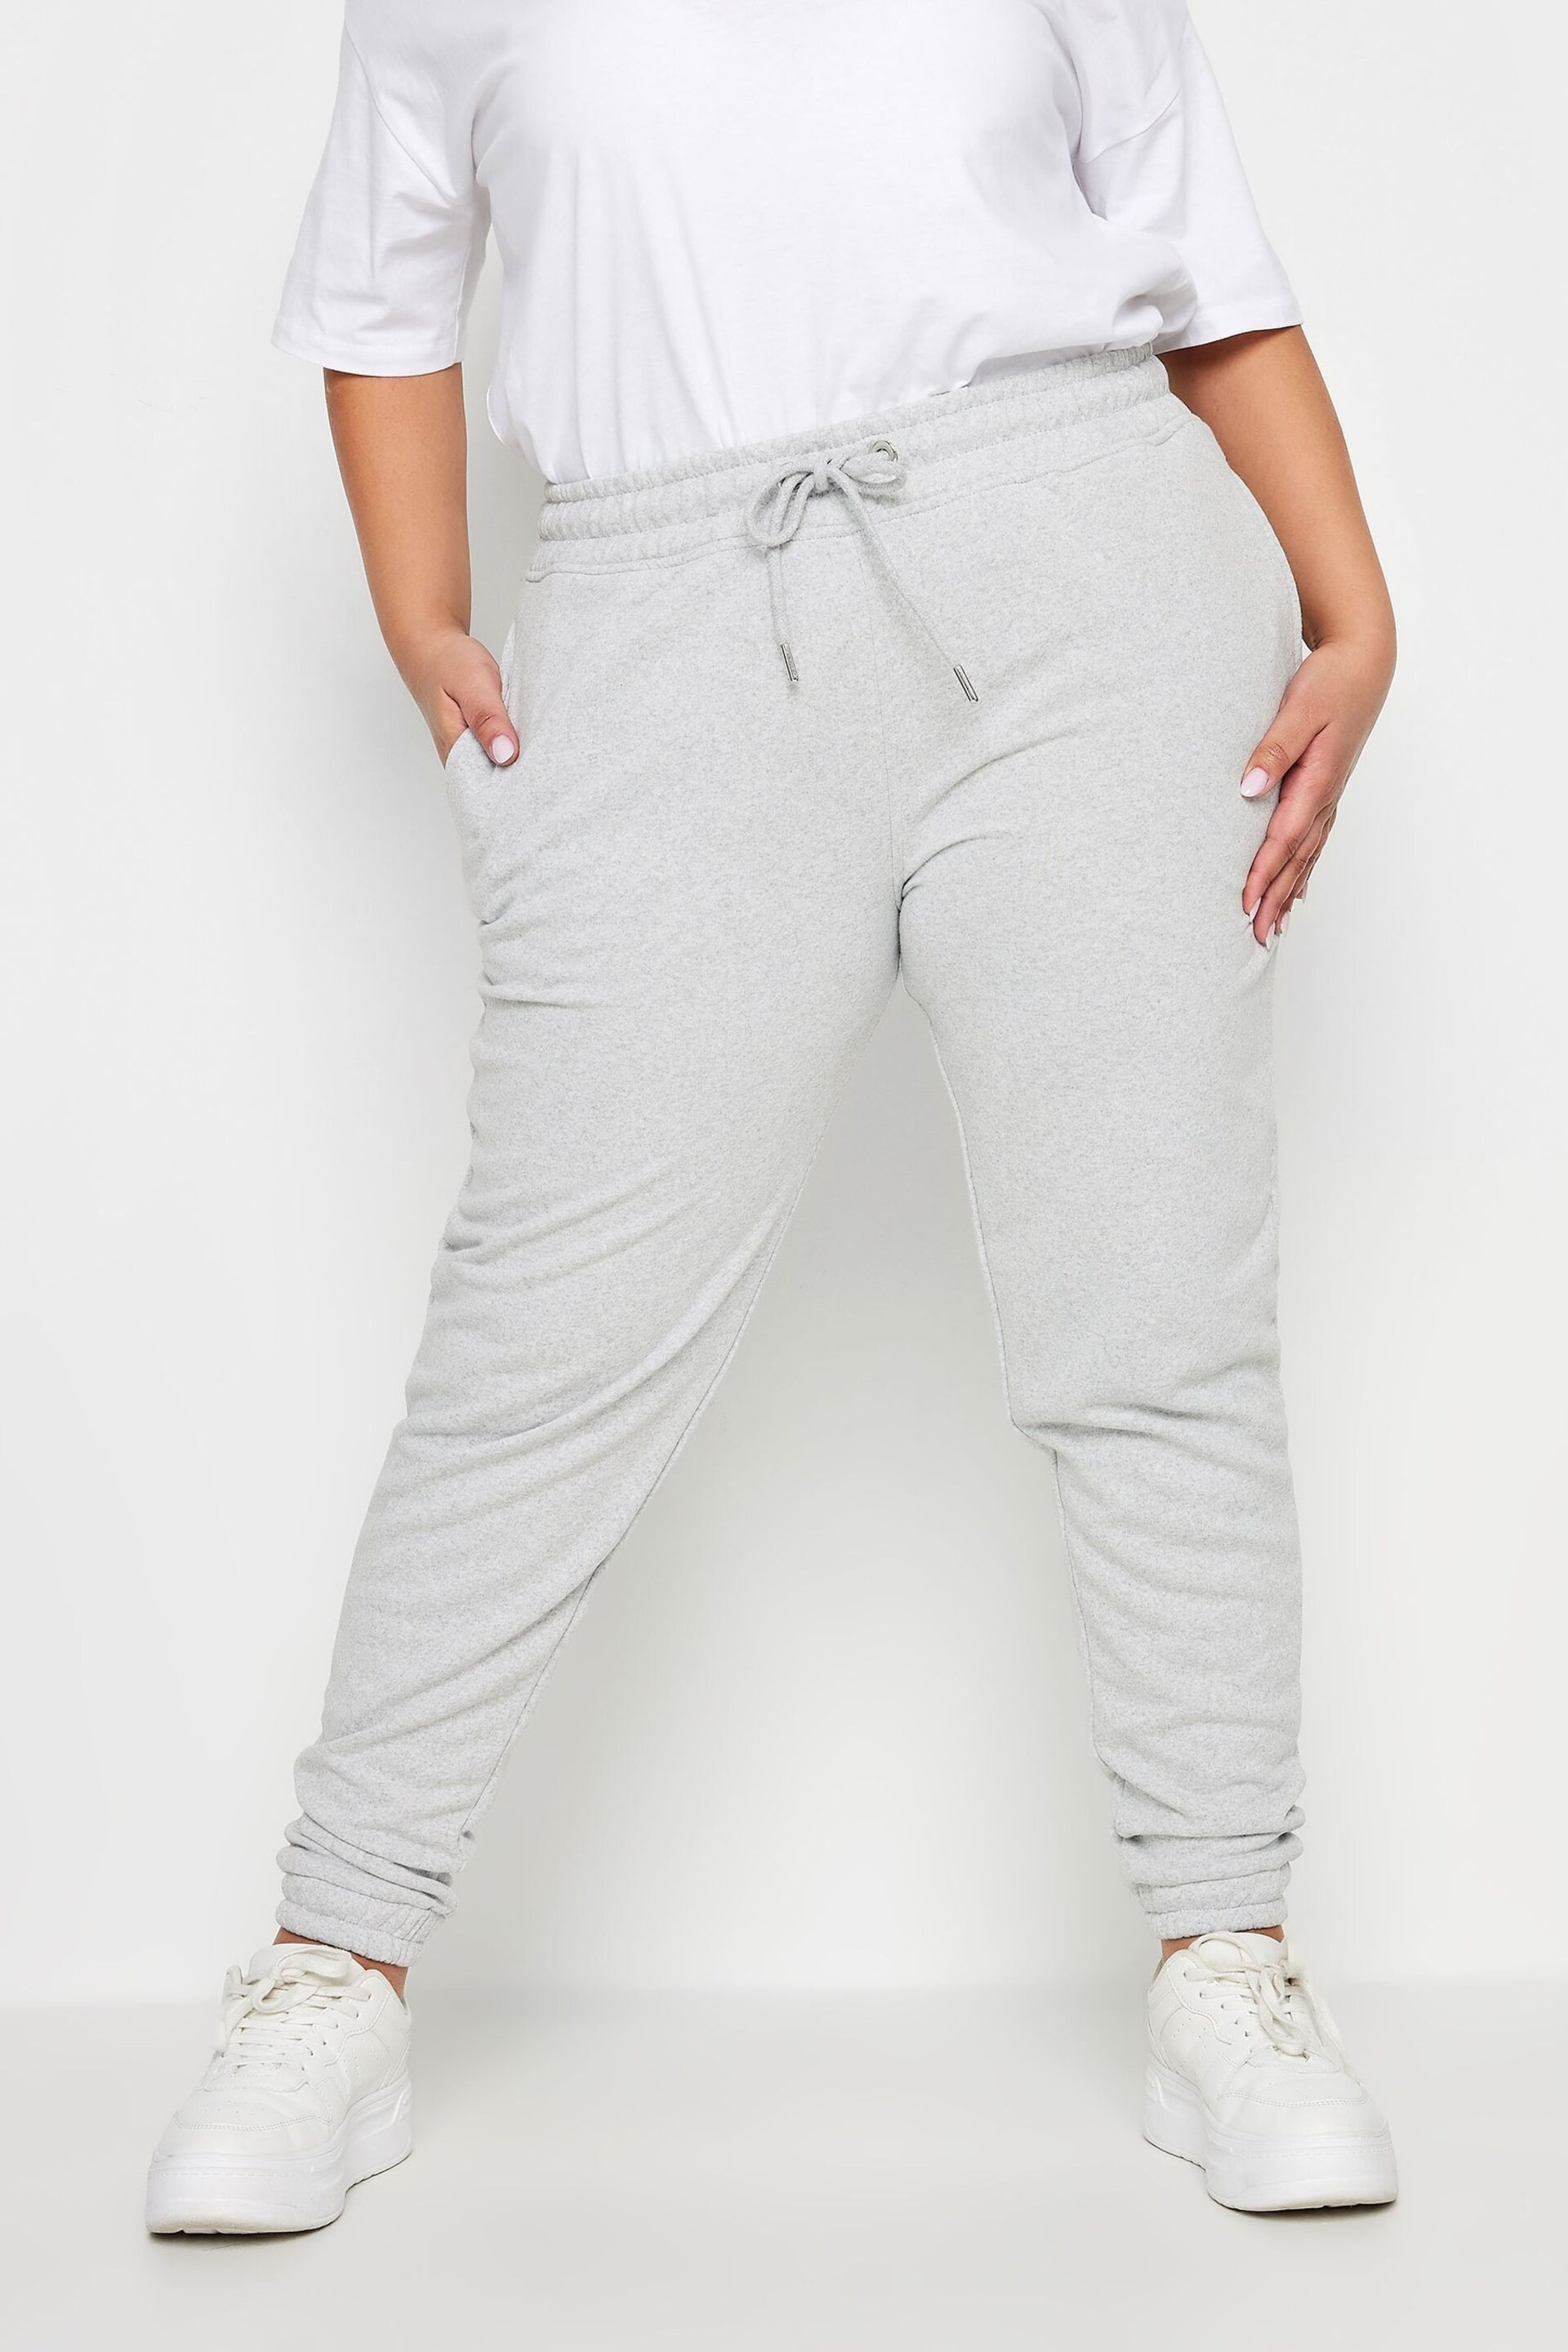 Yours Curve Grey Elasticated Stretch Joggers - Image 1 of 5